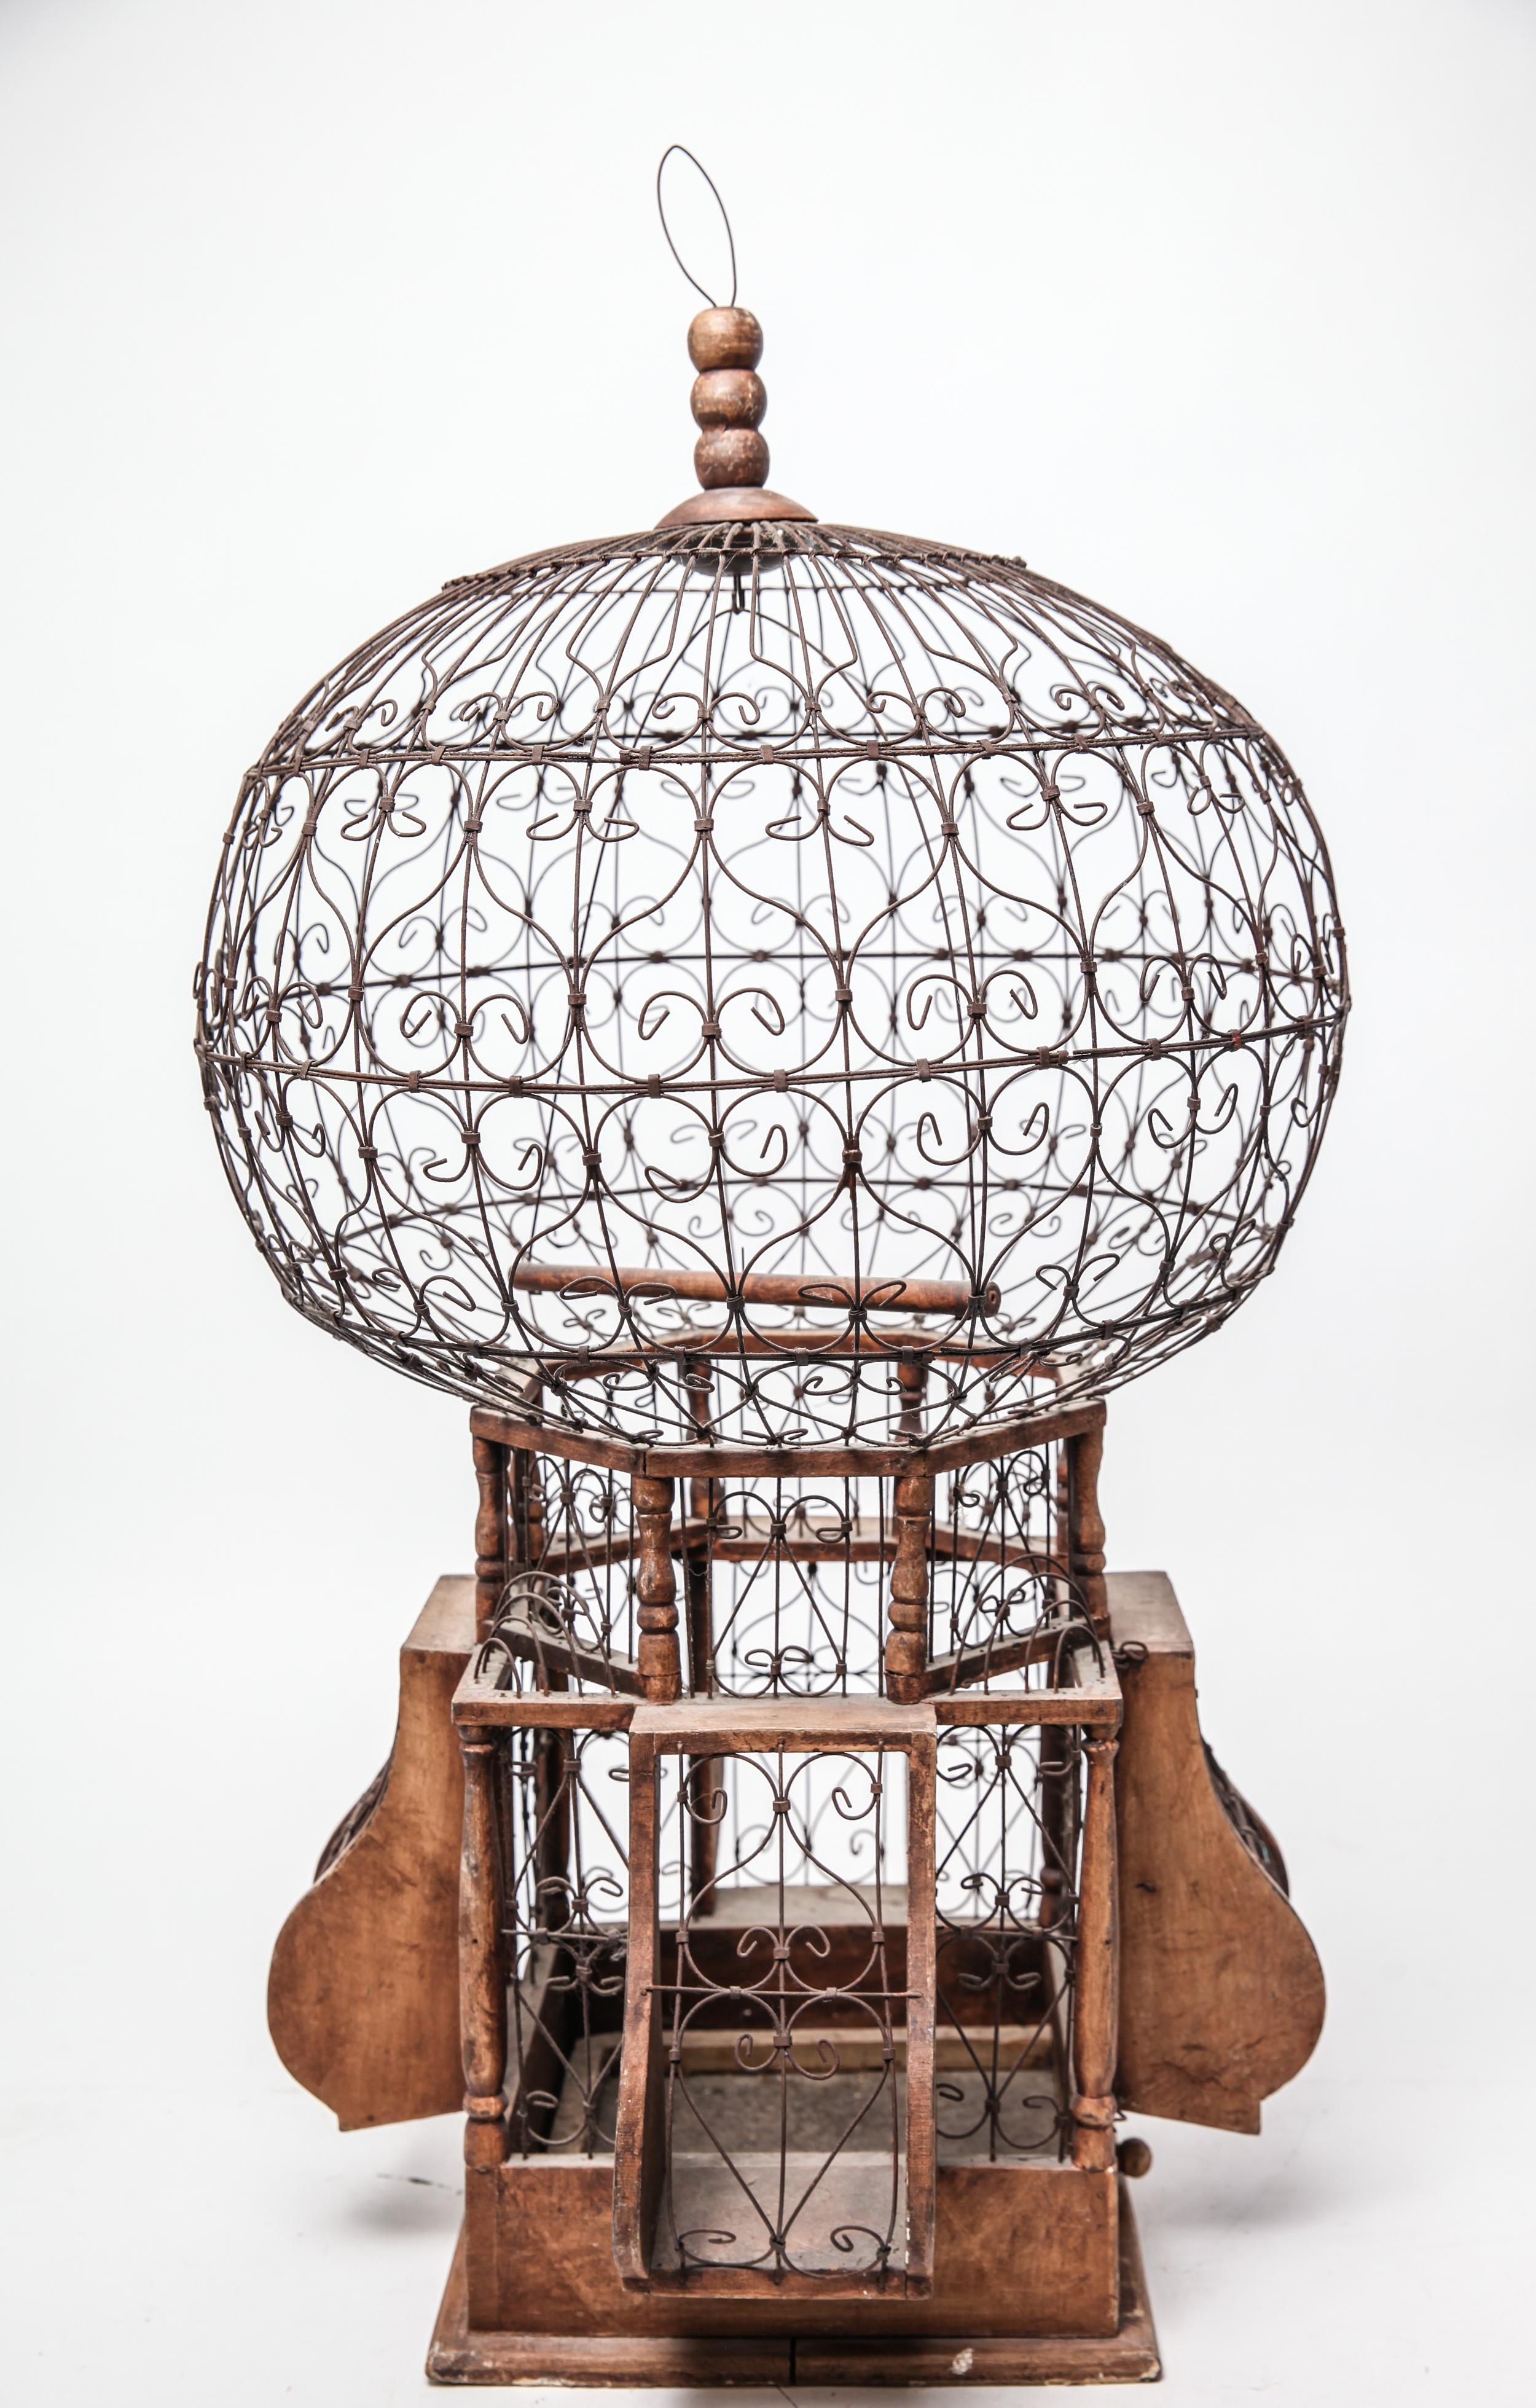 Victorian style large ornamental S-curve wire balloon form hanging bird cage on a wood and wire base, with one latching door. The piece can be pole-mounted and is in great vintage condition.